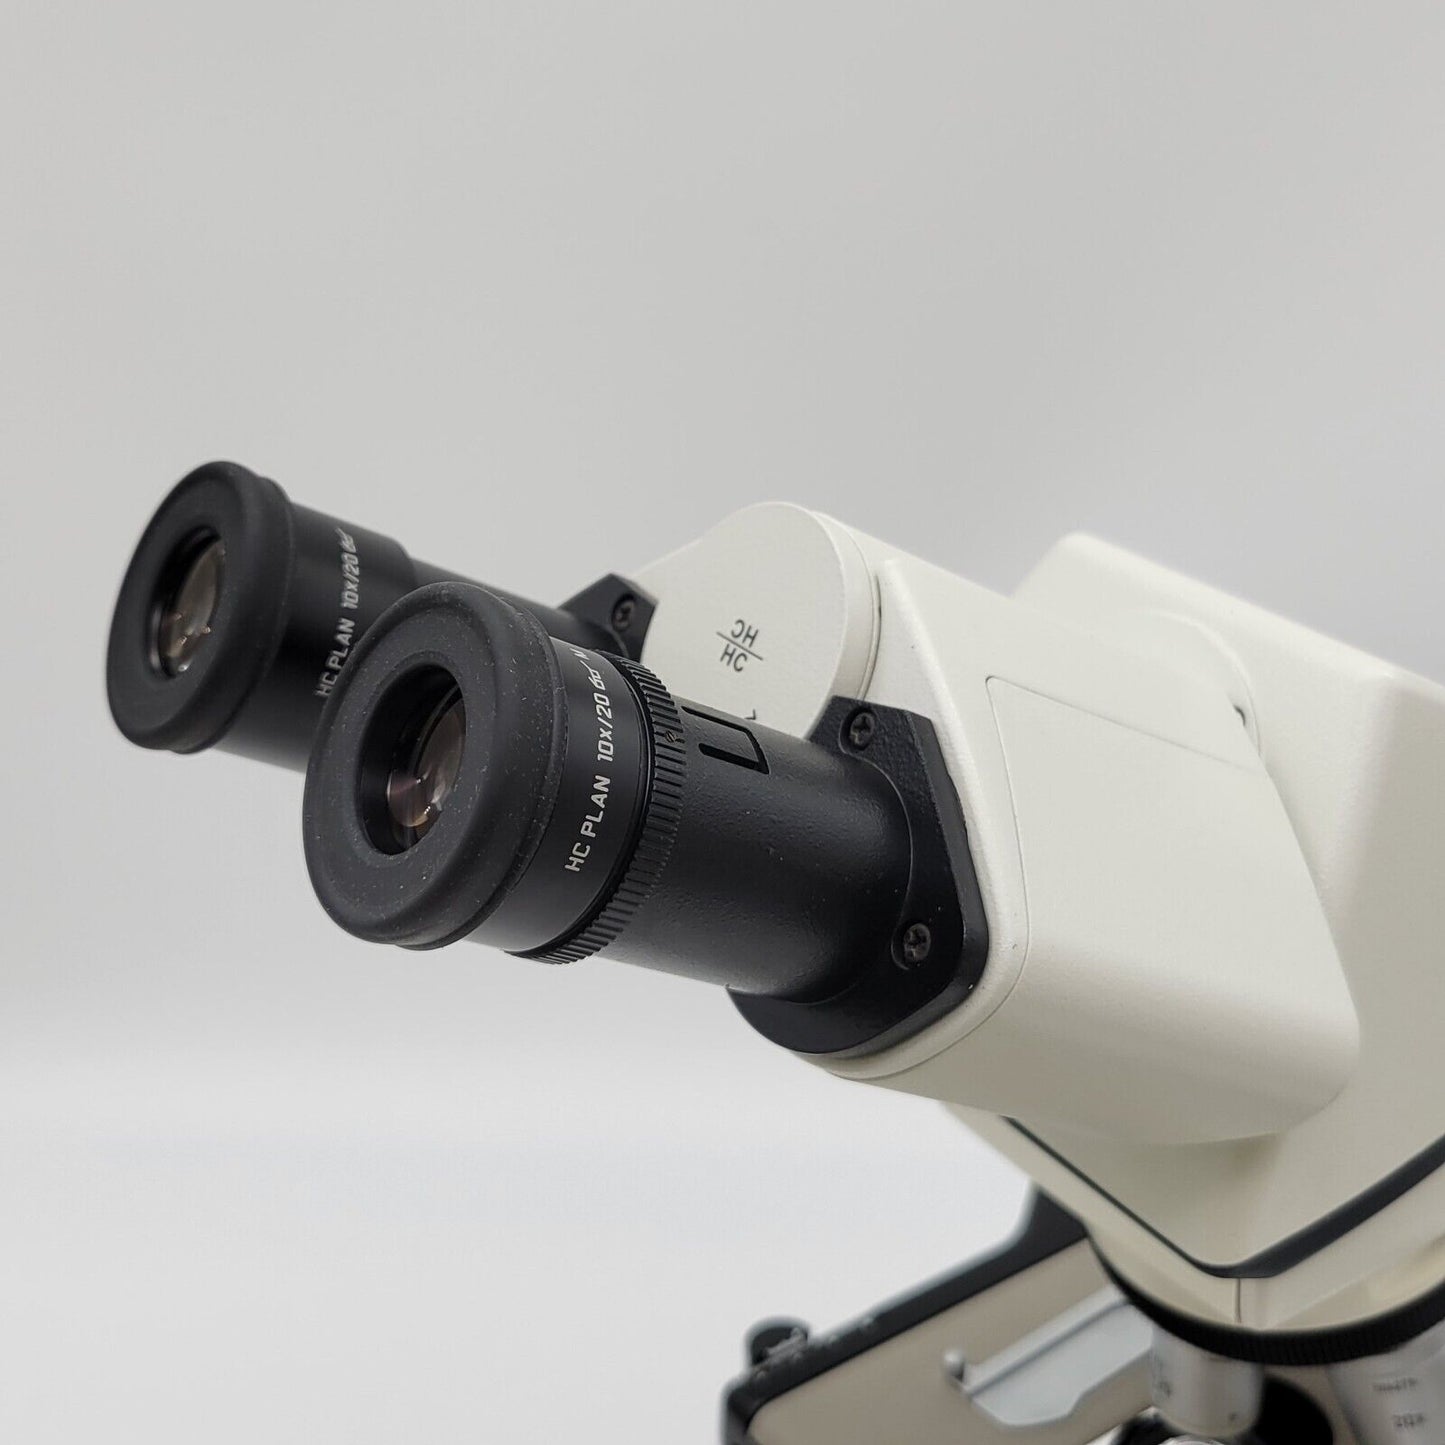 Leica Microscope DM1000 LED with 5x, 10x, 20x, 40x, and 100x Objectives - microscopemarketplace